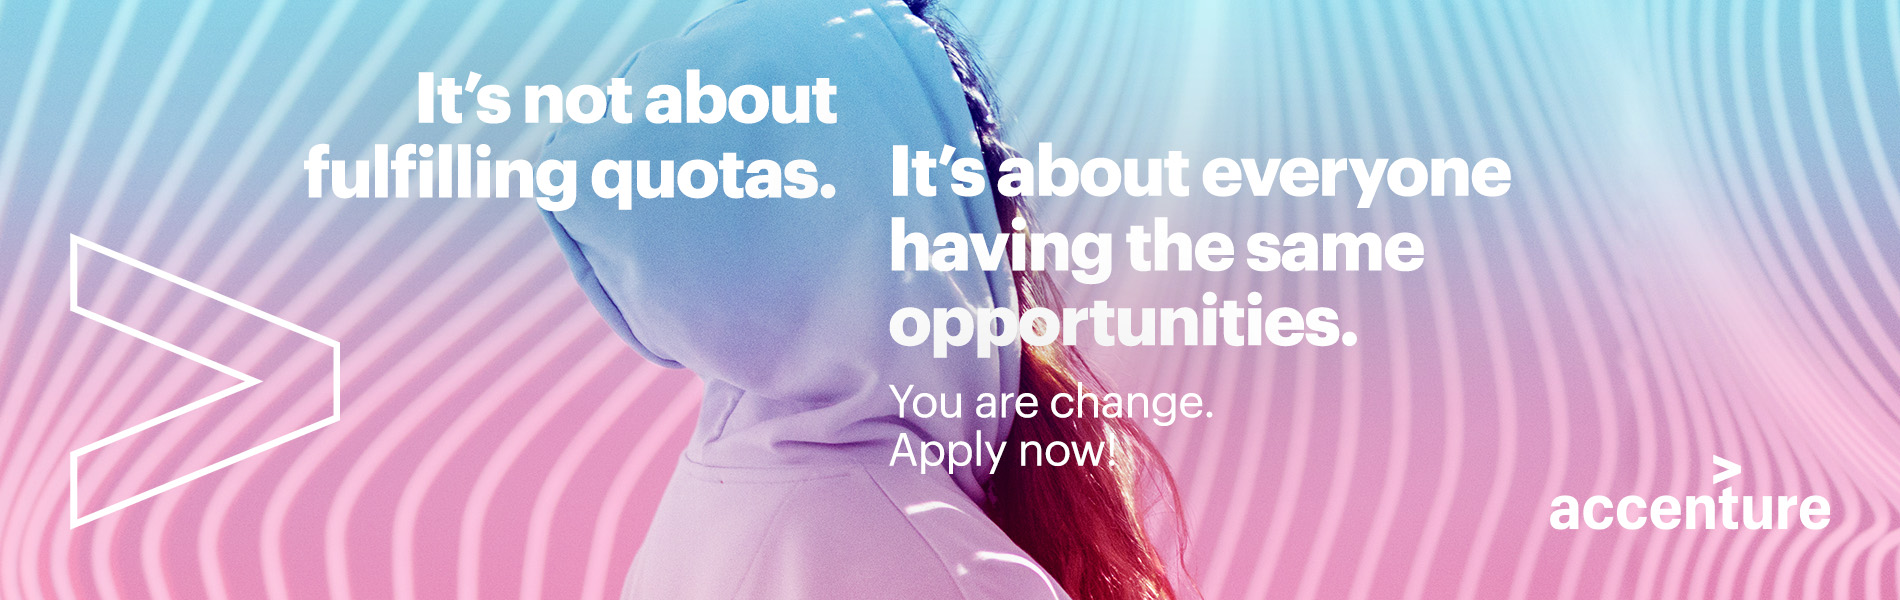 Accenture - It's not about fulfilling quotas